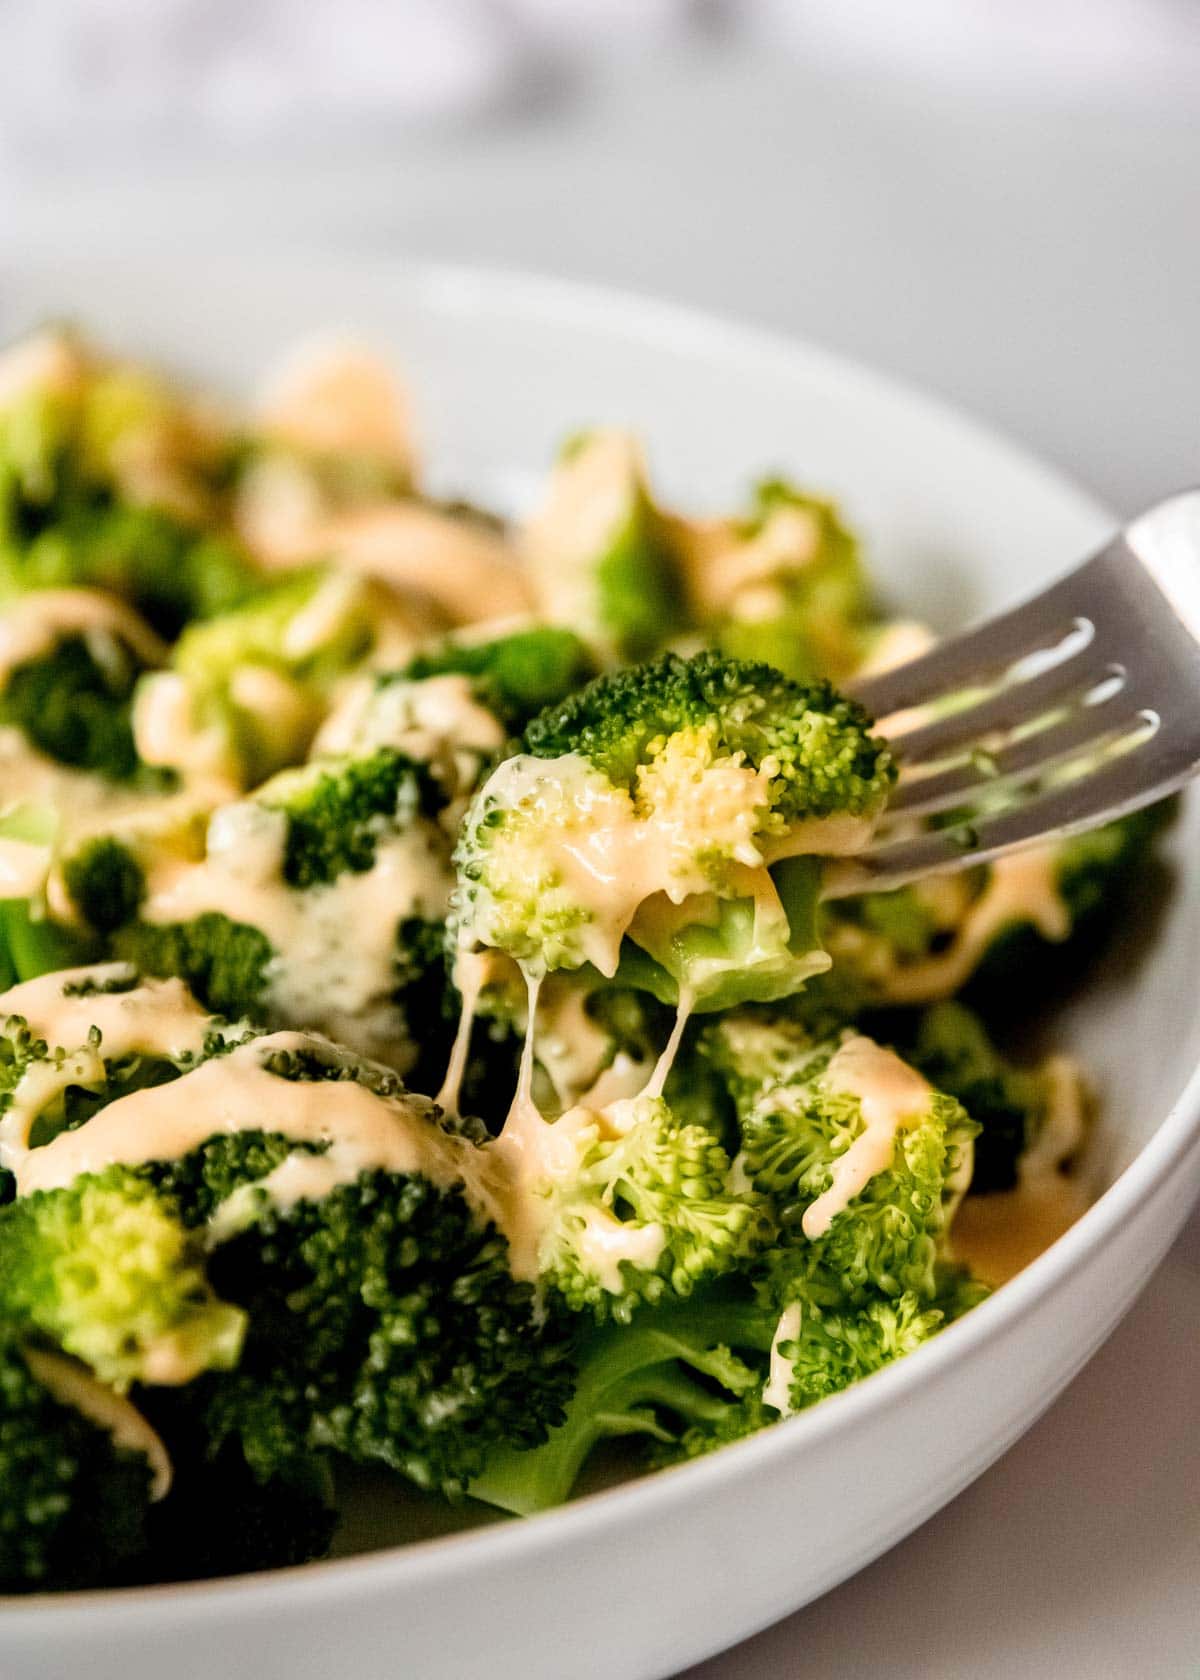 a fork with broccoli and cheese sauce being pulled from the plate